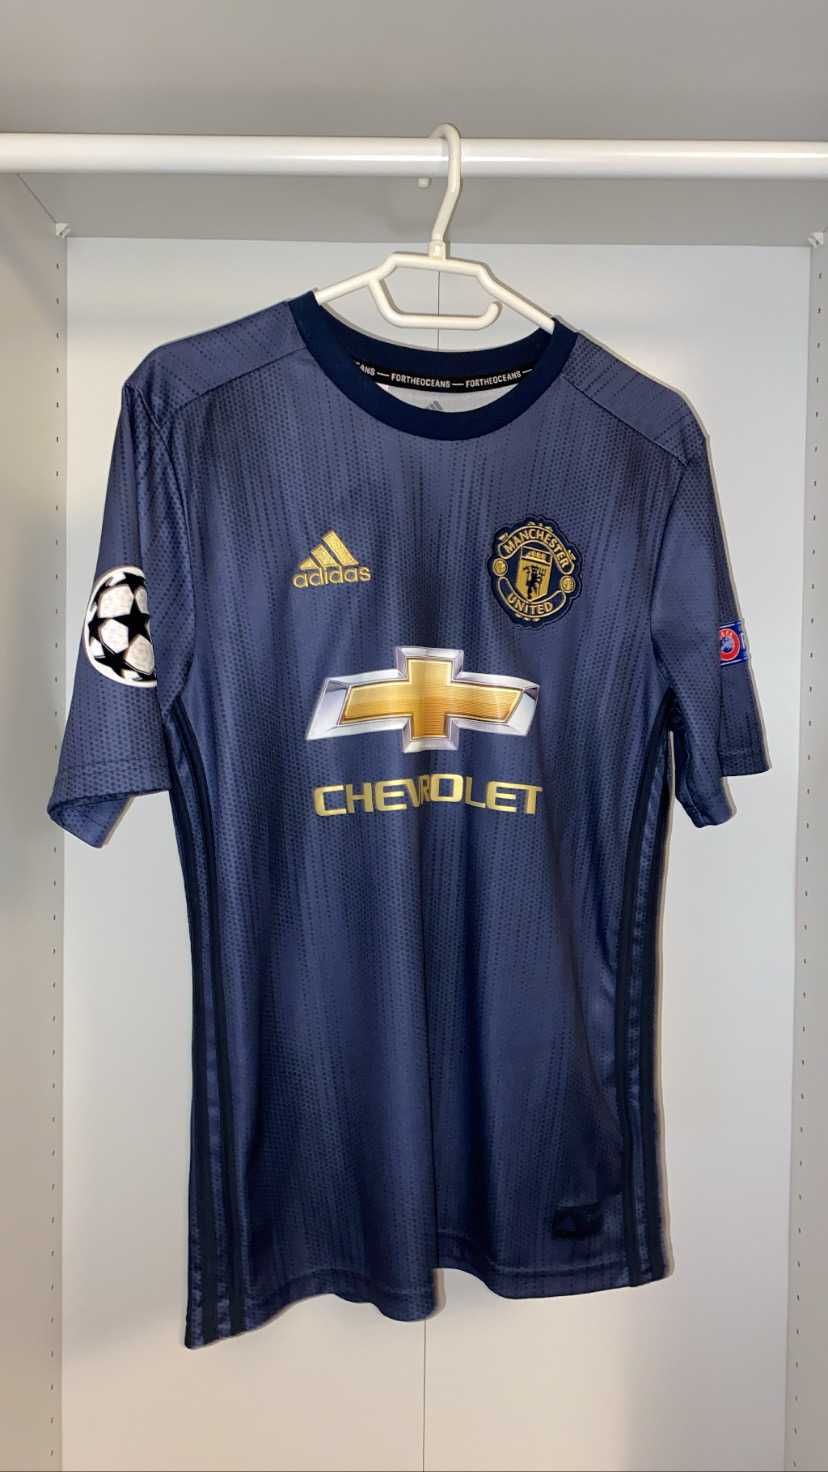 Camisola Oficial UCL Manchester United 2018/19 (3º Equipamento)